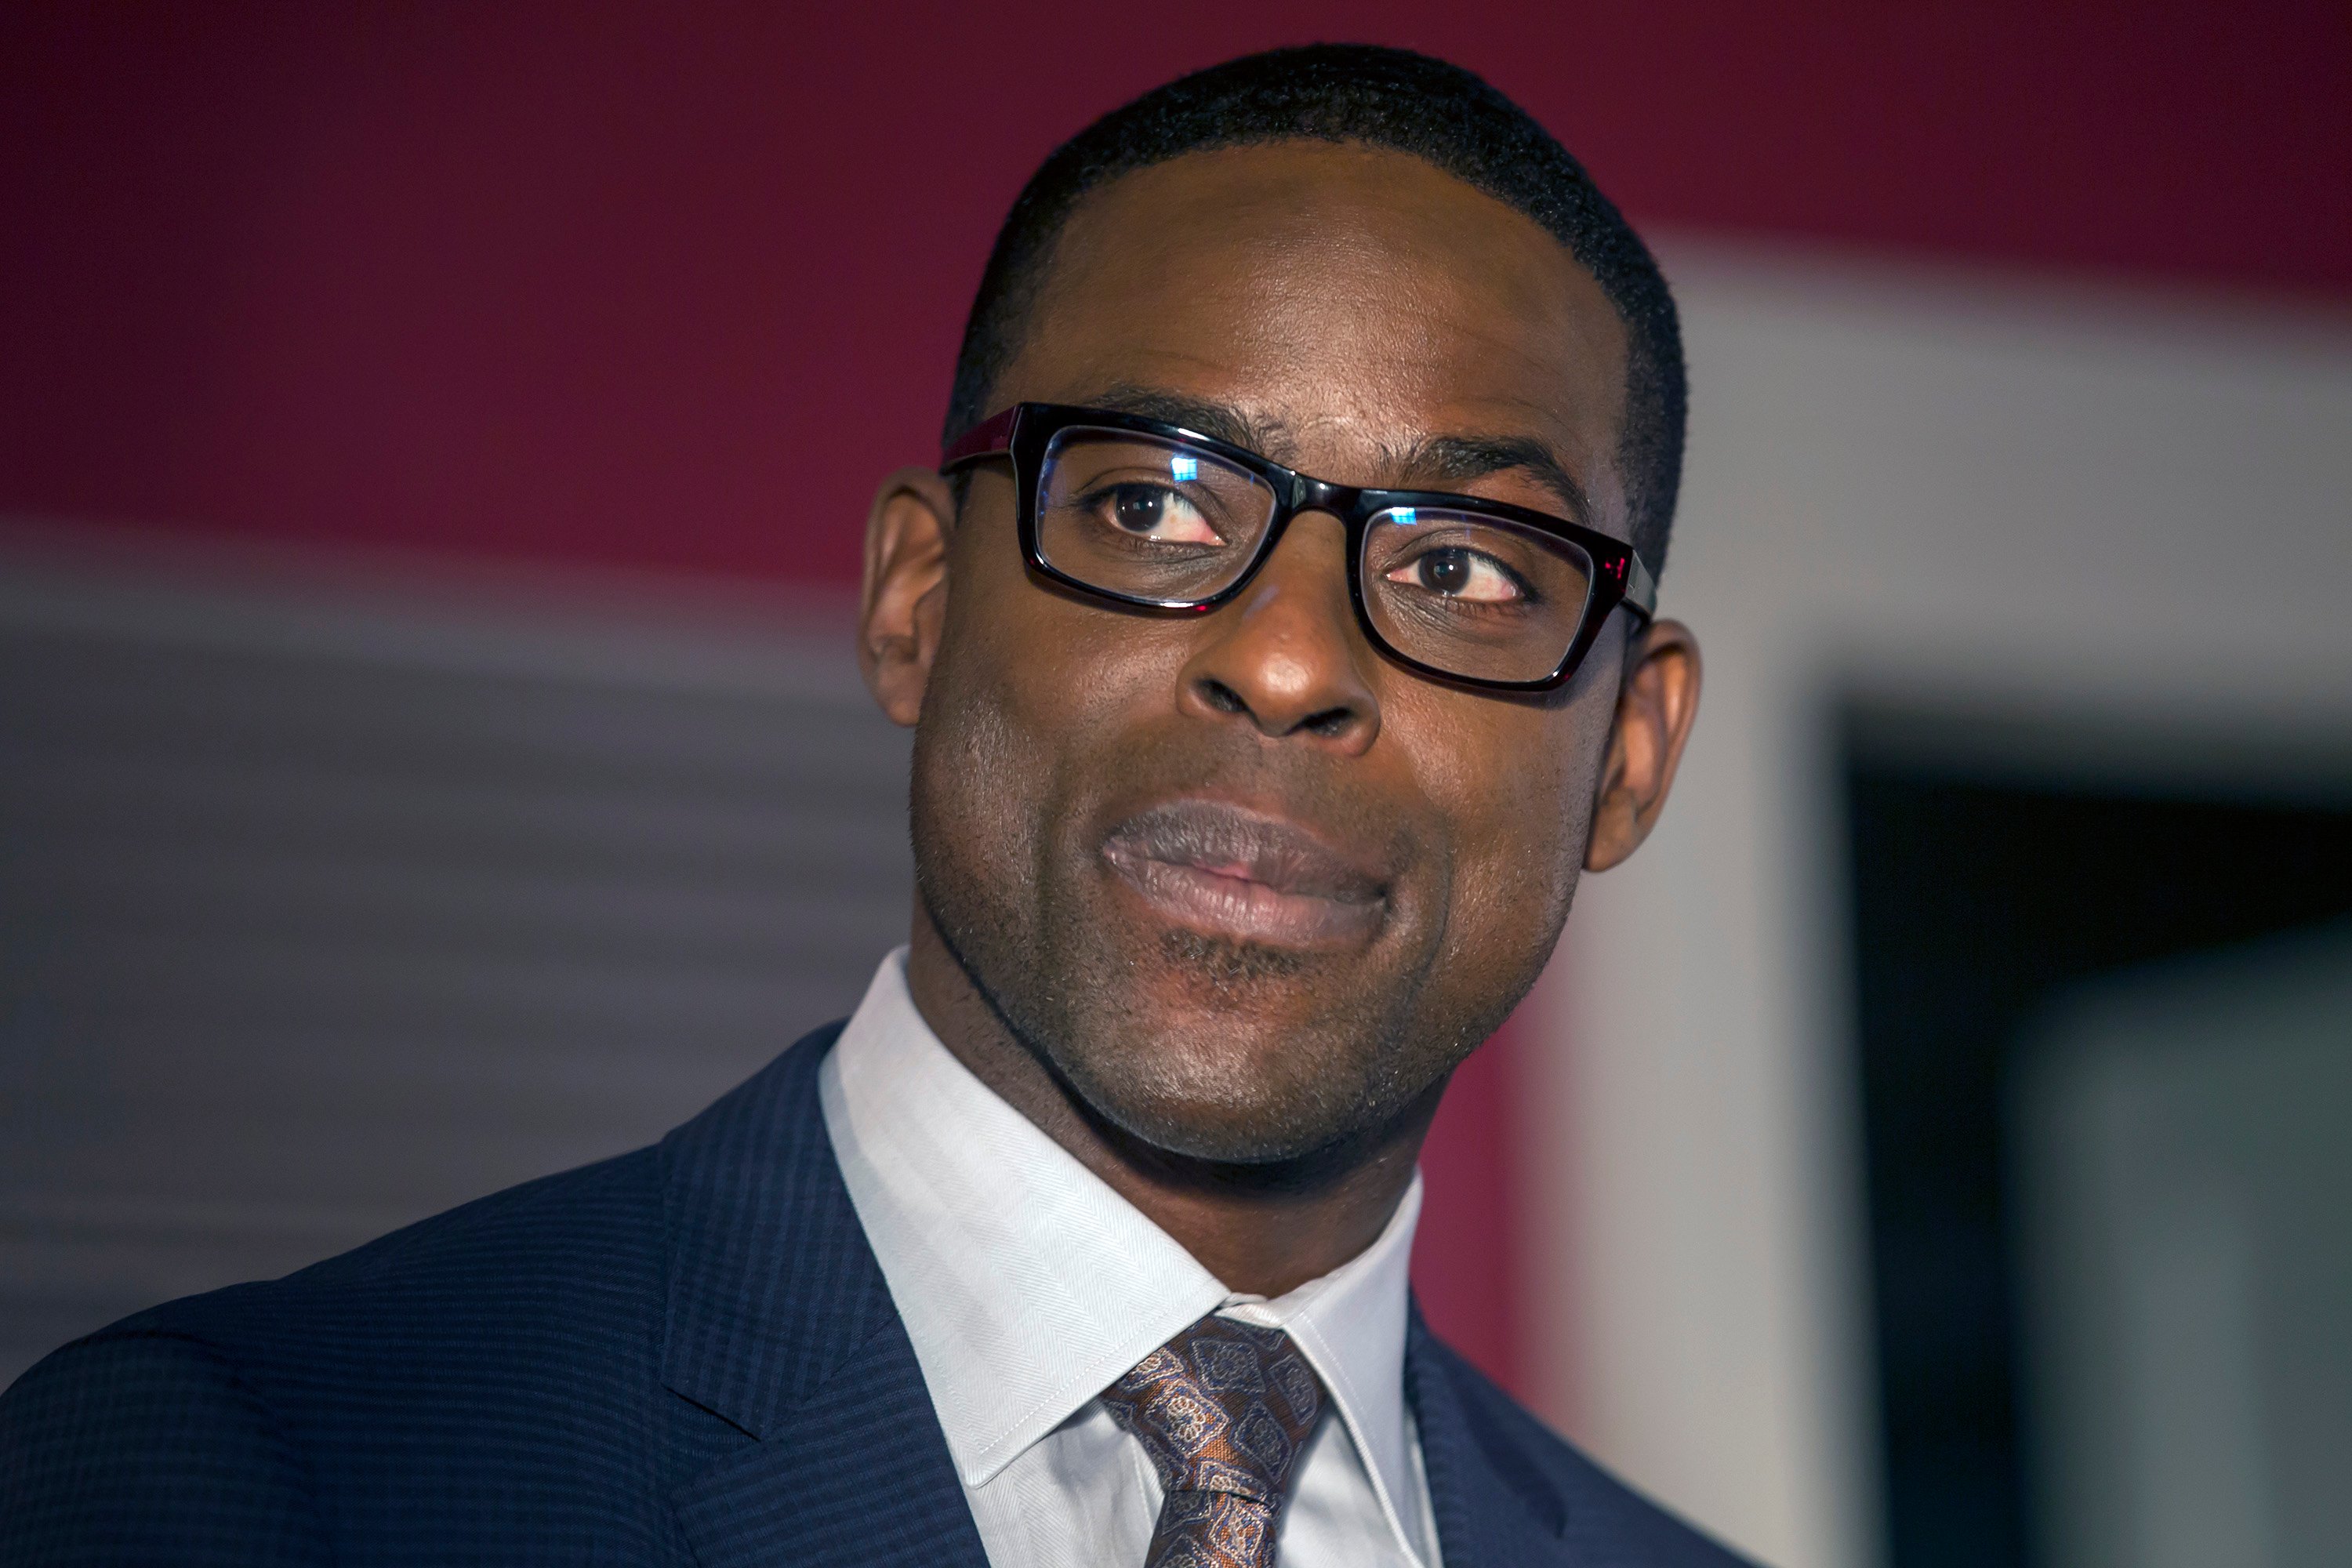 'This Is Us' star Sterling K. Brown smiling as Randall Pearson during an episode.